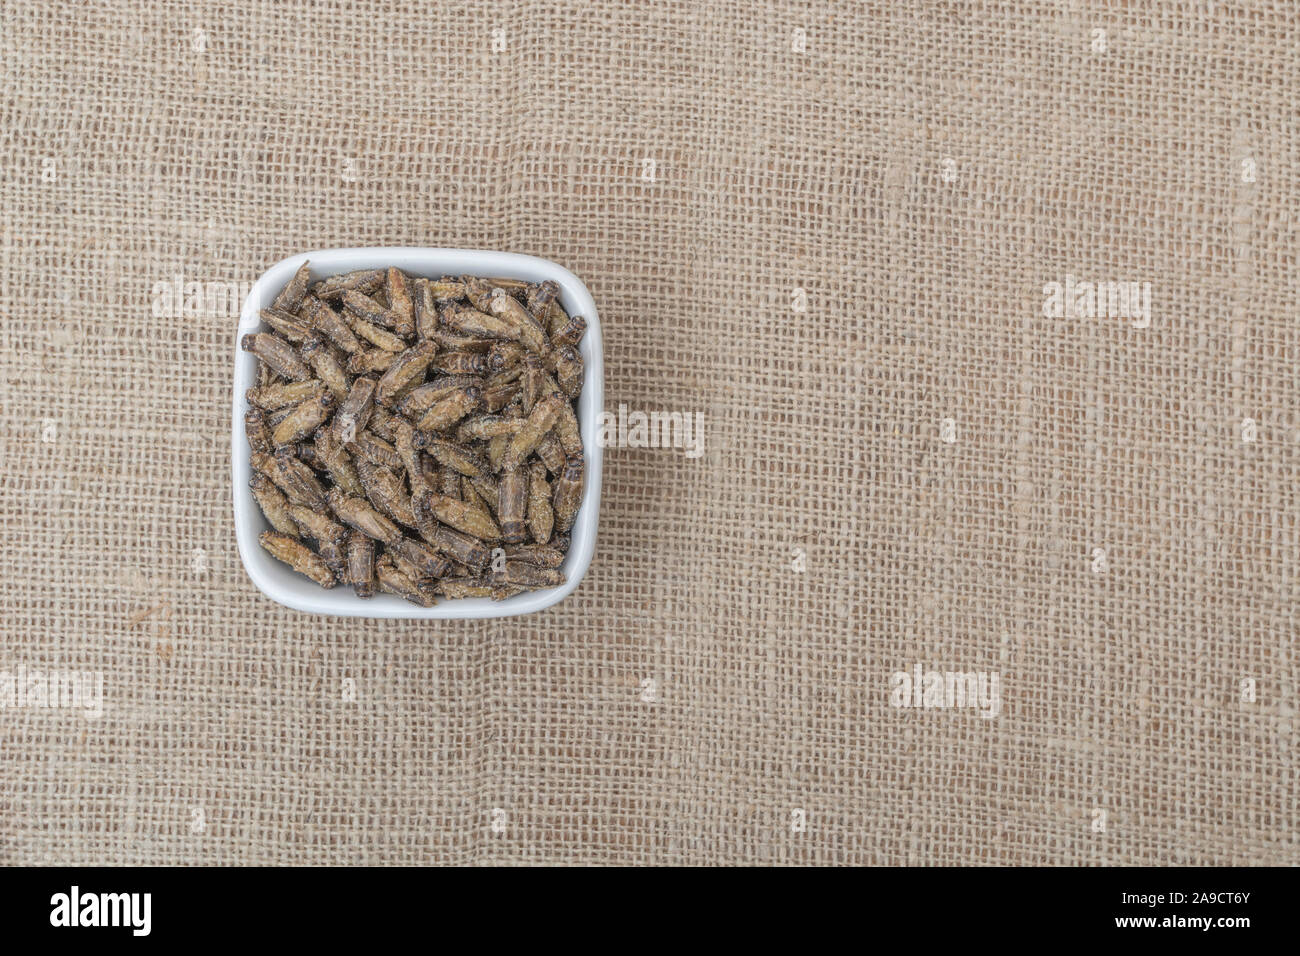 Edible insects - salted Small Crickets possibly Gryllus assimilis - on hessian sack. Entomophagy, edible bugs, insect superfoods, insects as food. Stock Photo